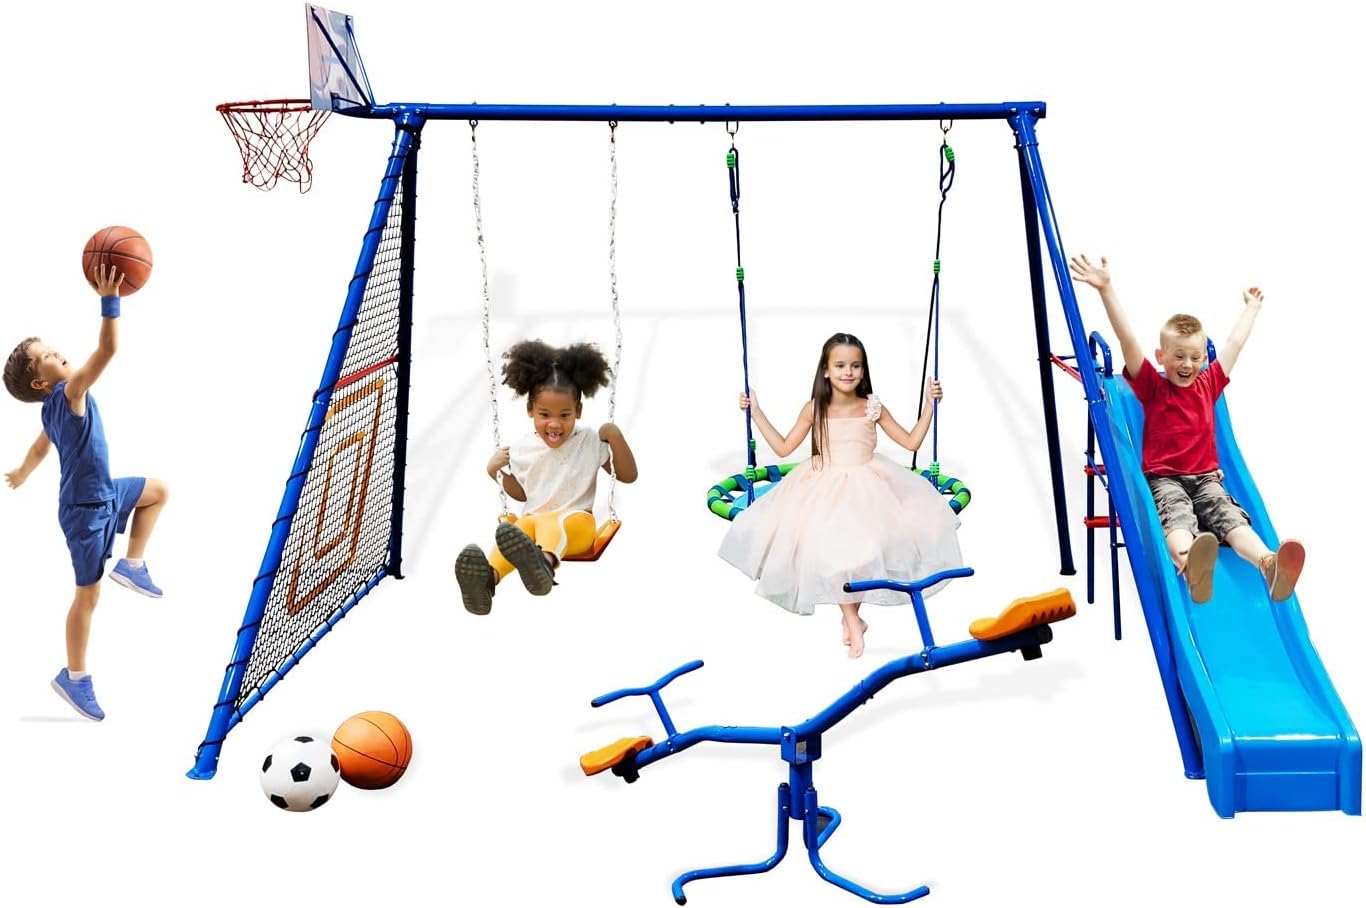 FITNESS REALITY KIDS 6 Station Swing Set with Slide